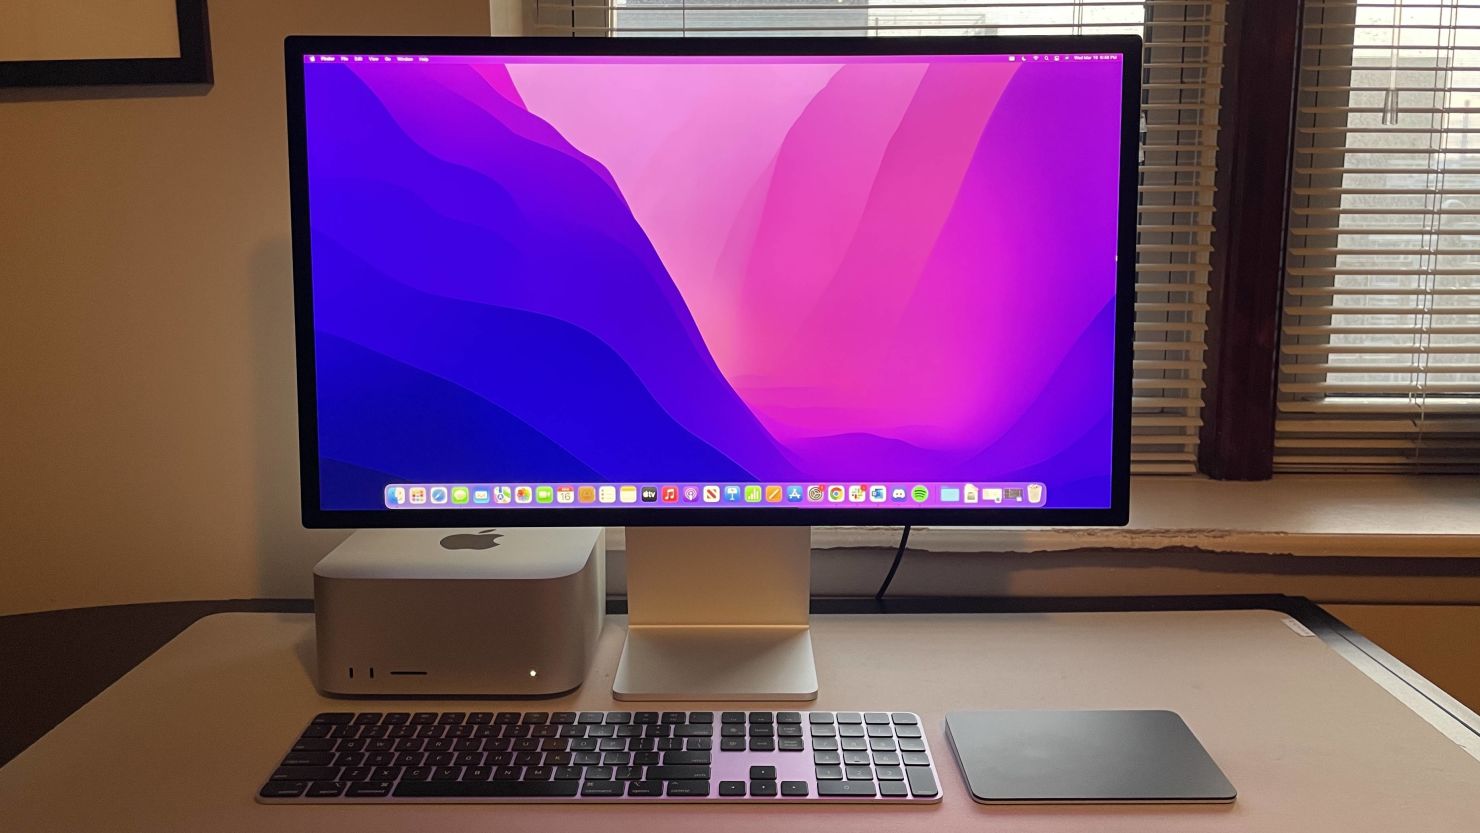 Review: LG UltraFine 4K Display paired with Apple's 2016 MacBook